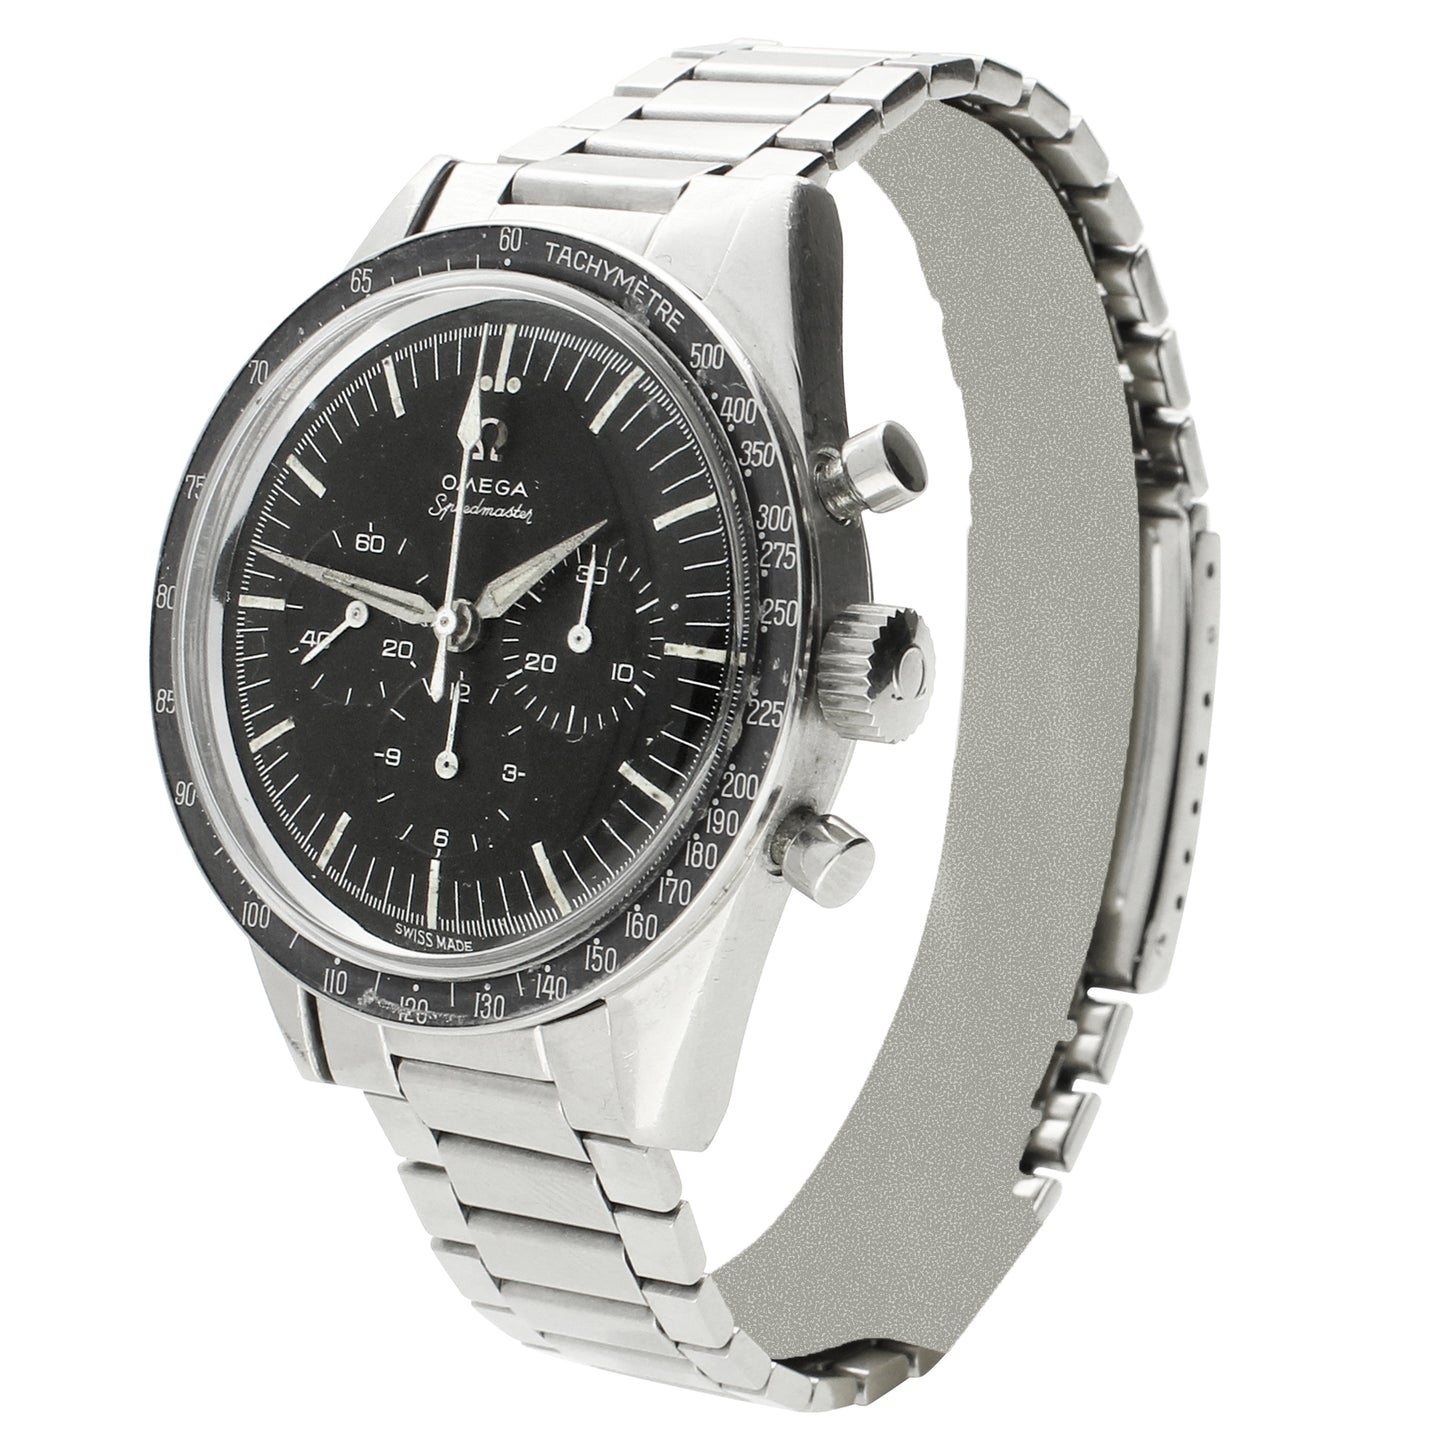 Stainless steel Speedmaster reference 105.002-62 wristwatch. Made 1963